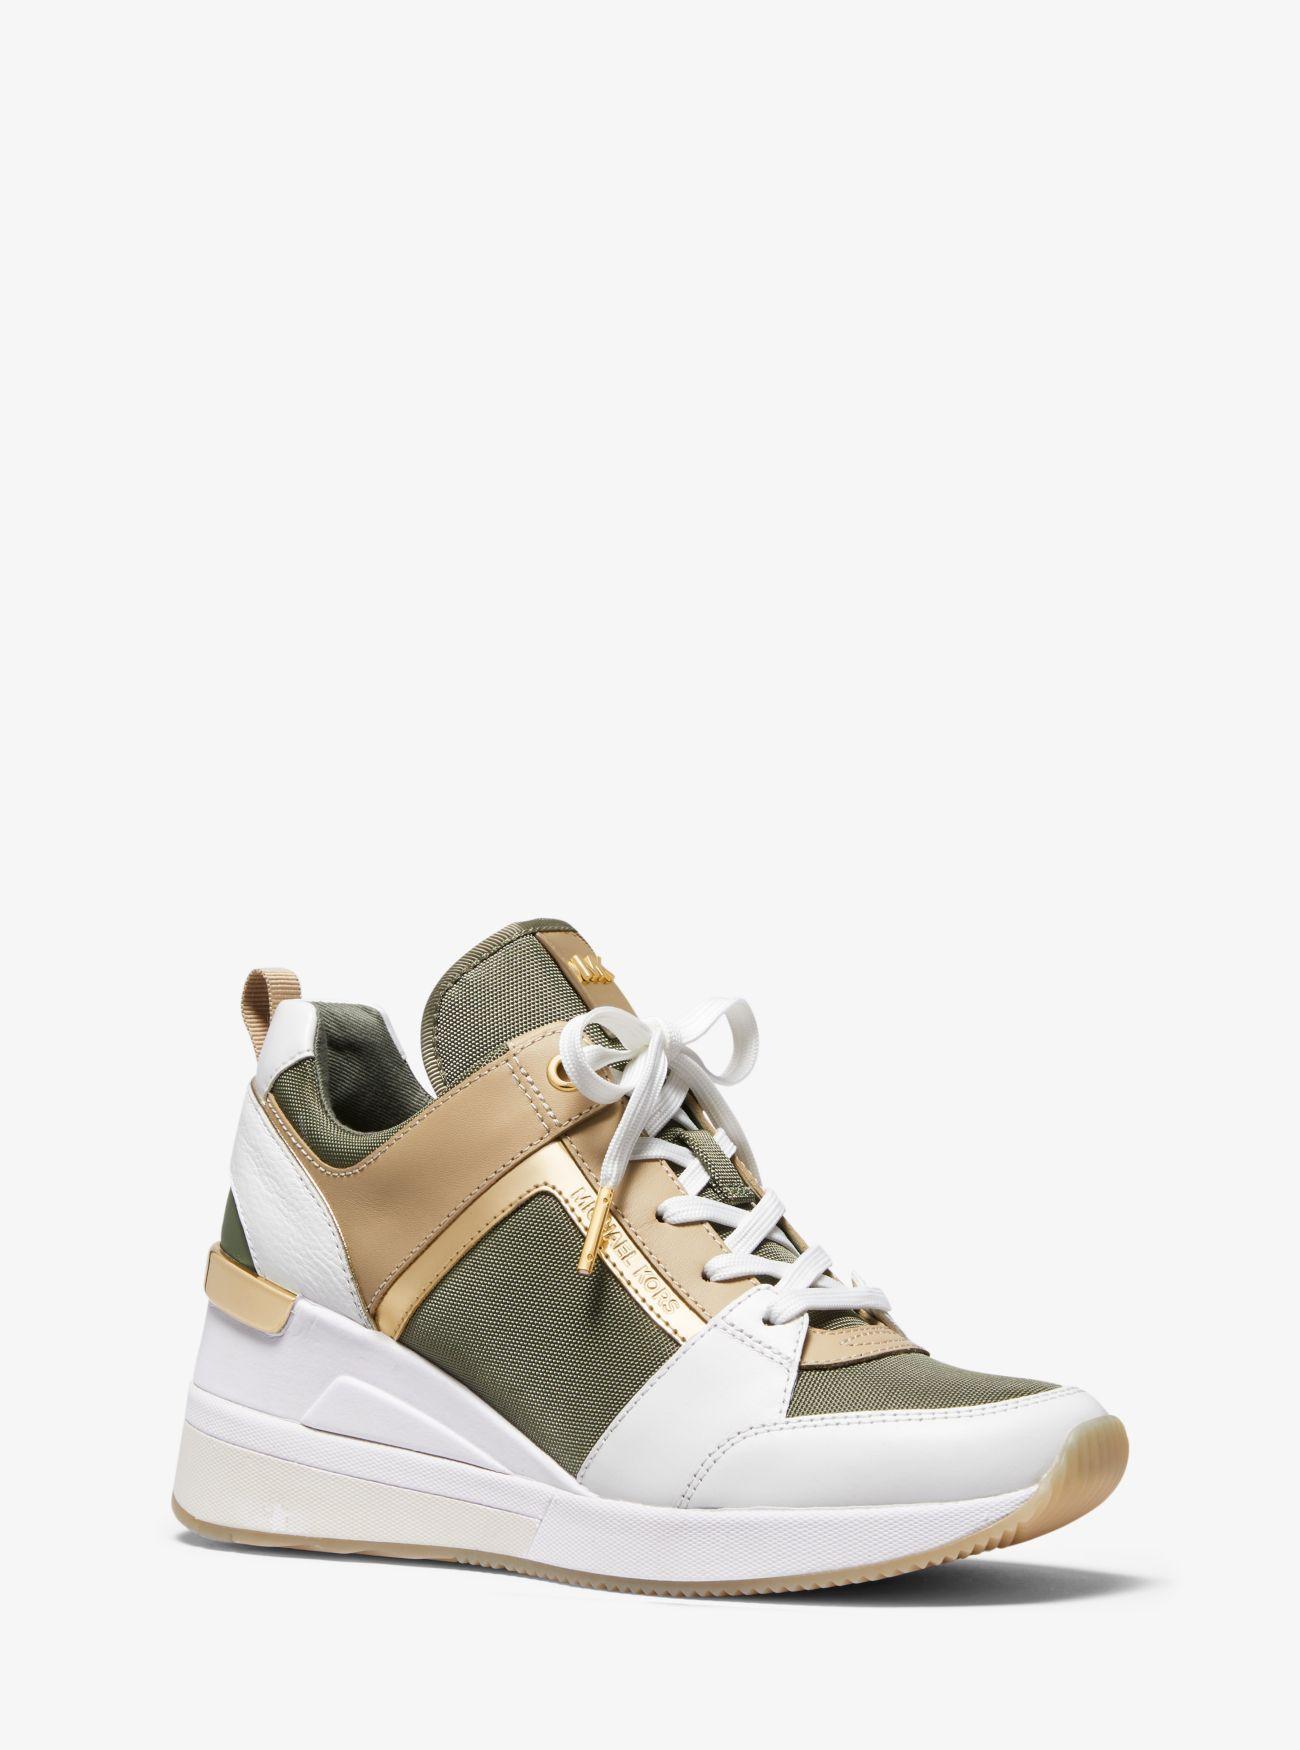 Michael Kors Georgie Canvas And Leather Trainer in Green | Lyst